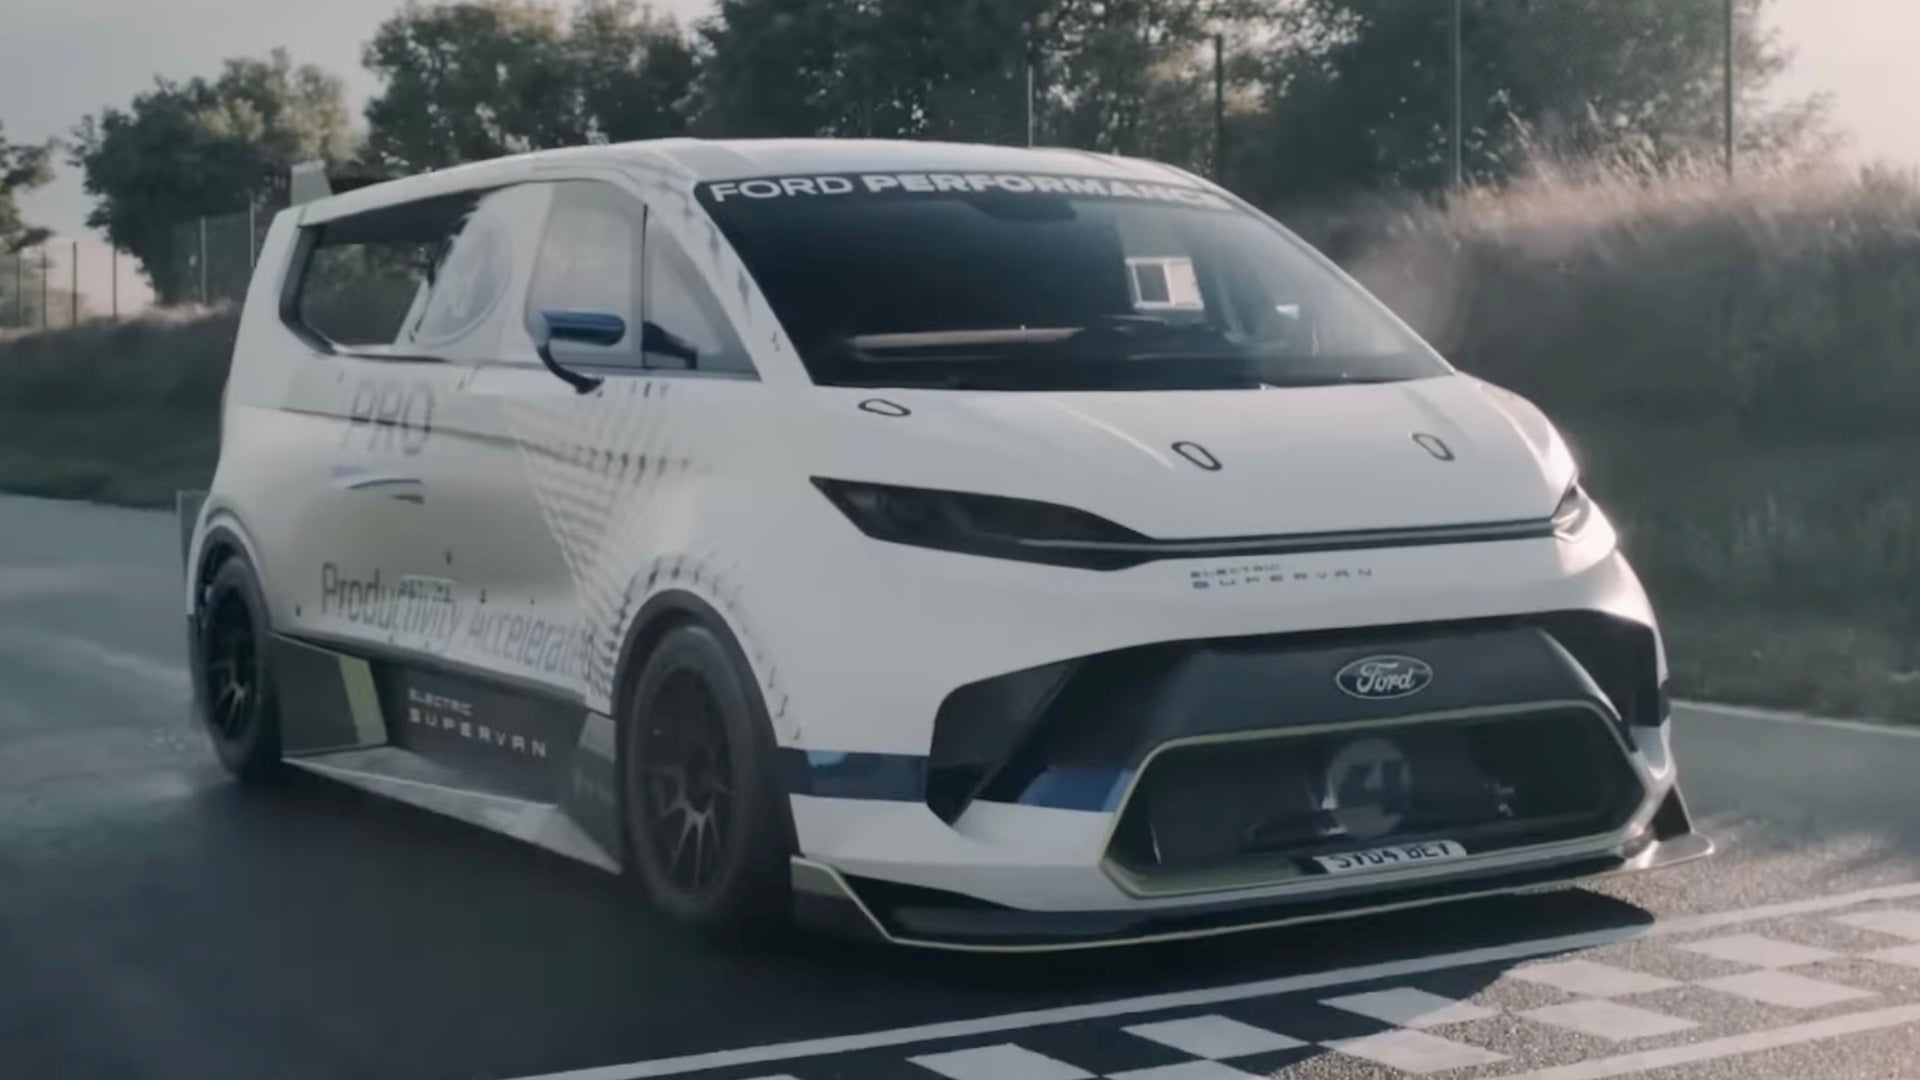 1,973-HP Ford SuperVan To Race Pikes Peak With Record-Holder Driving